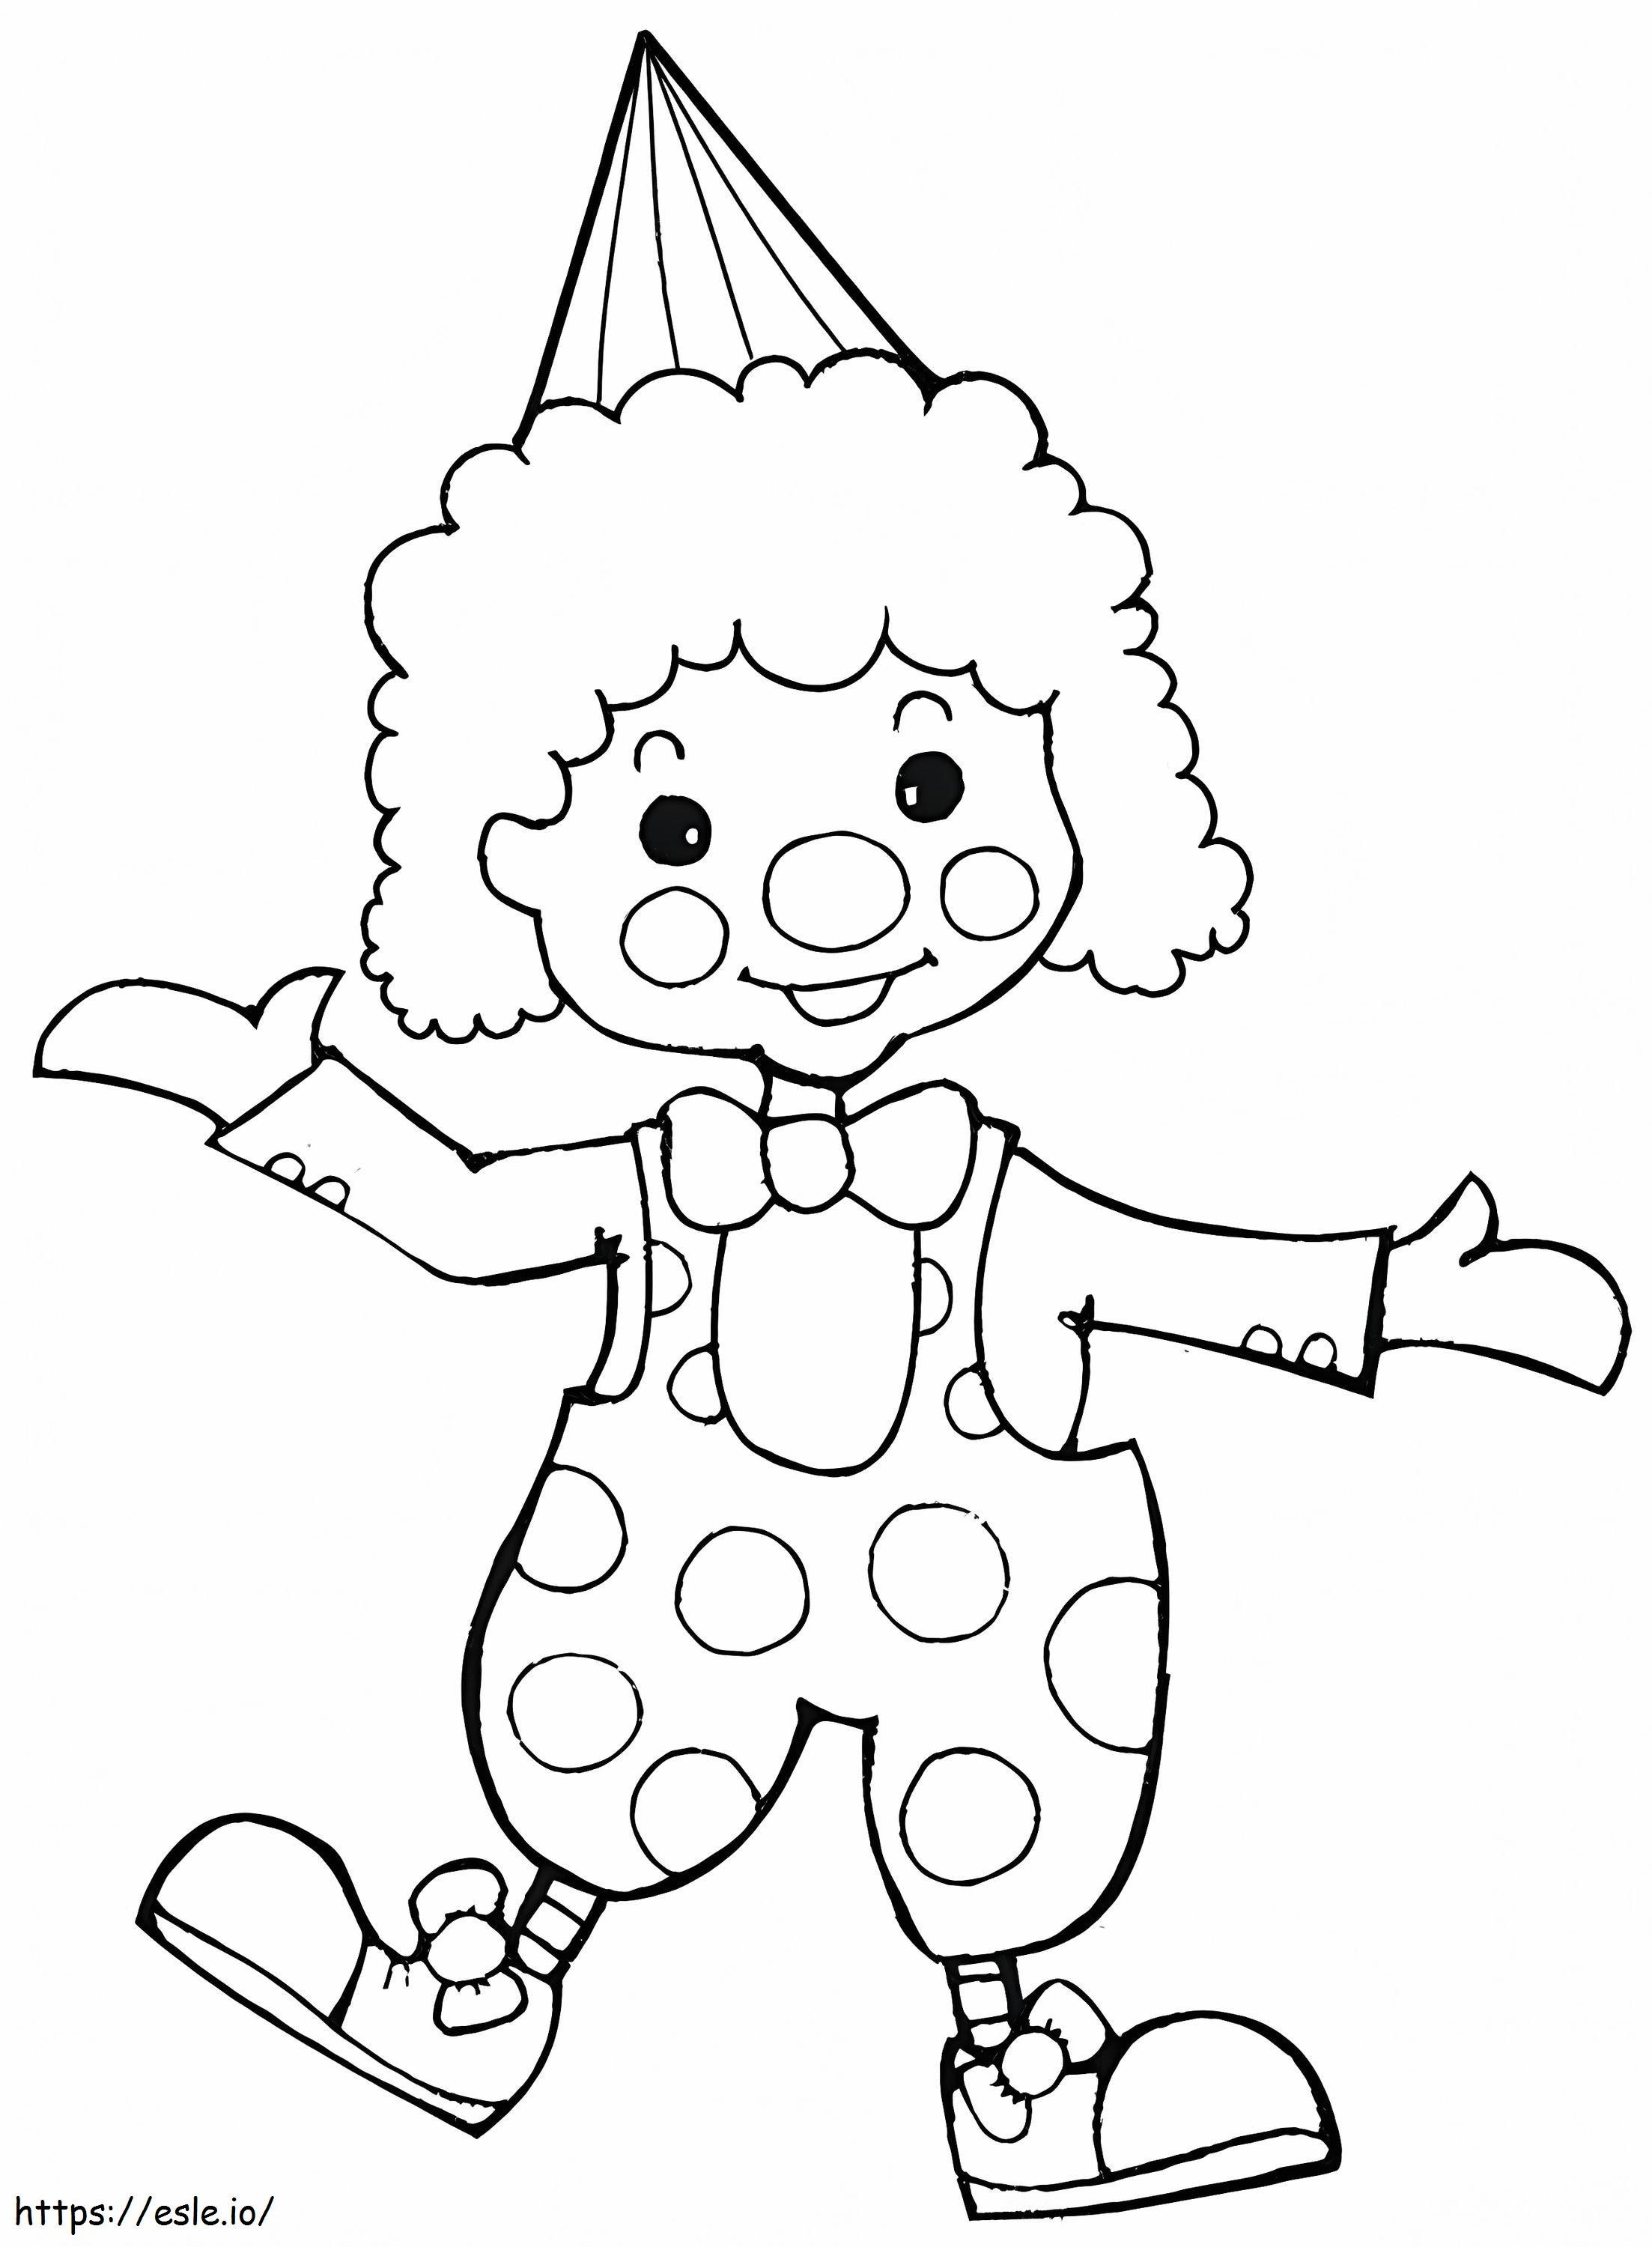 Cute Clown coloring page